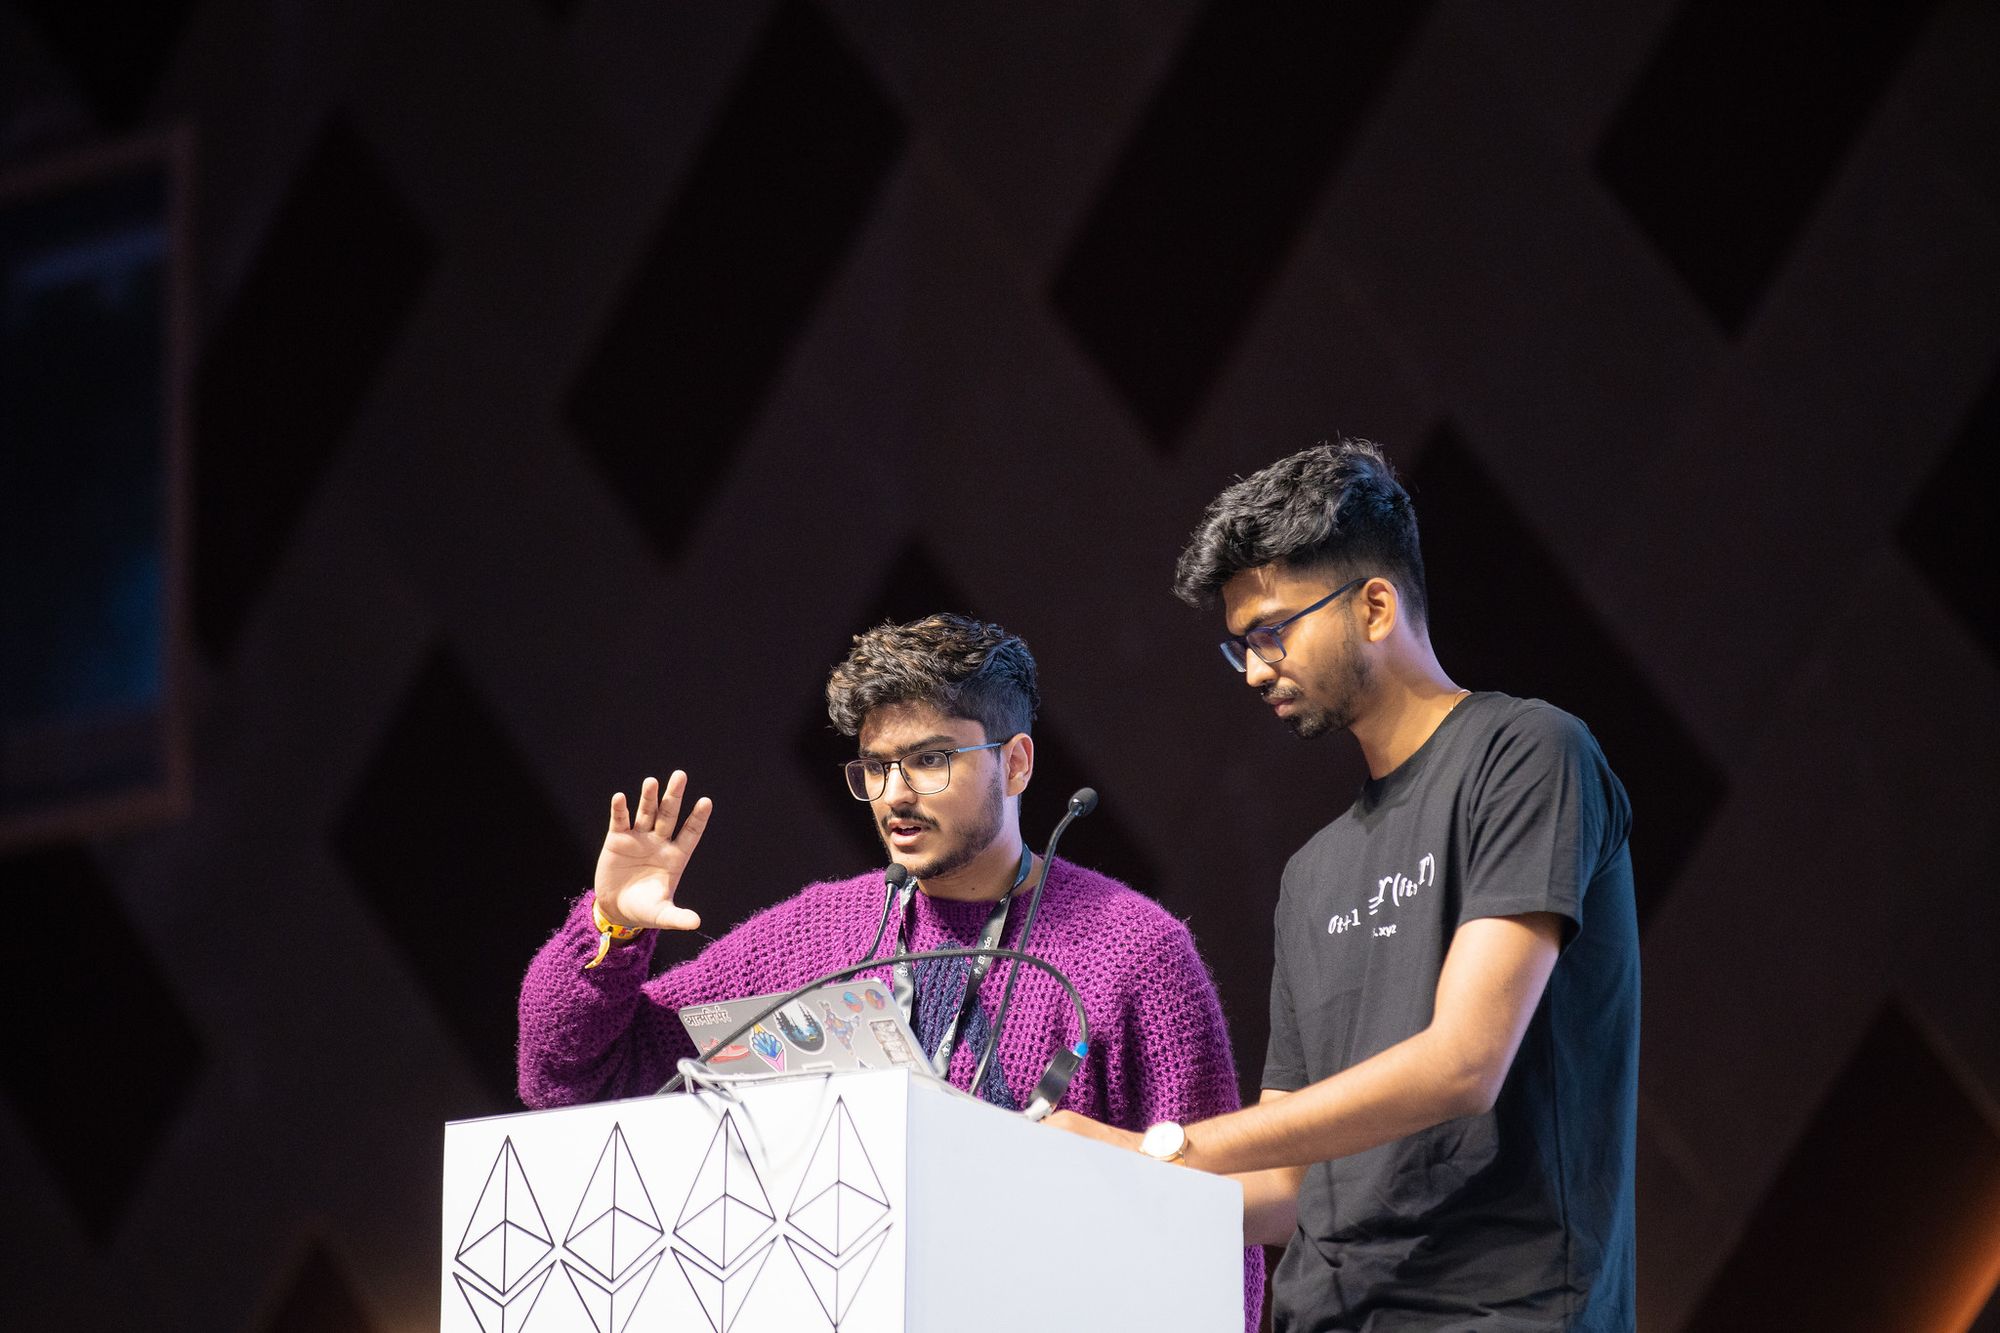 Inside ETHIndia 2023: Building the Impossible with Ethereum